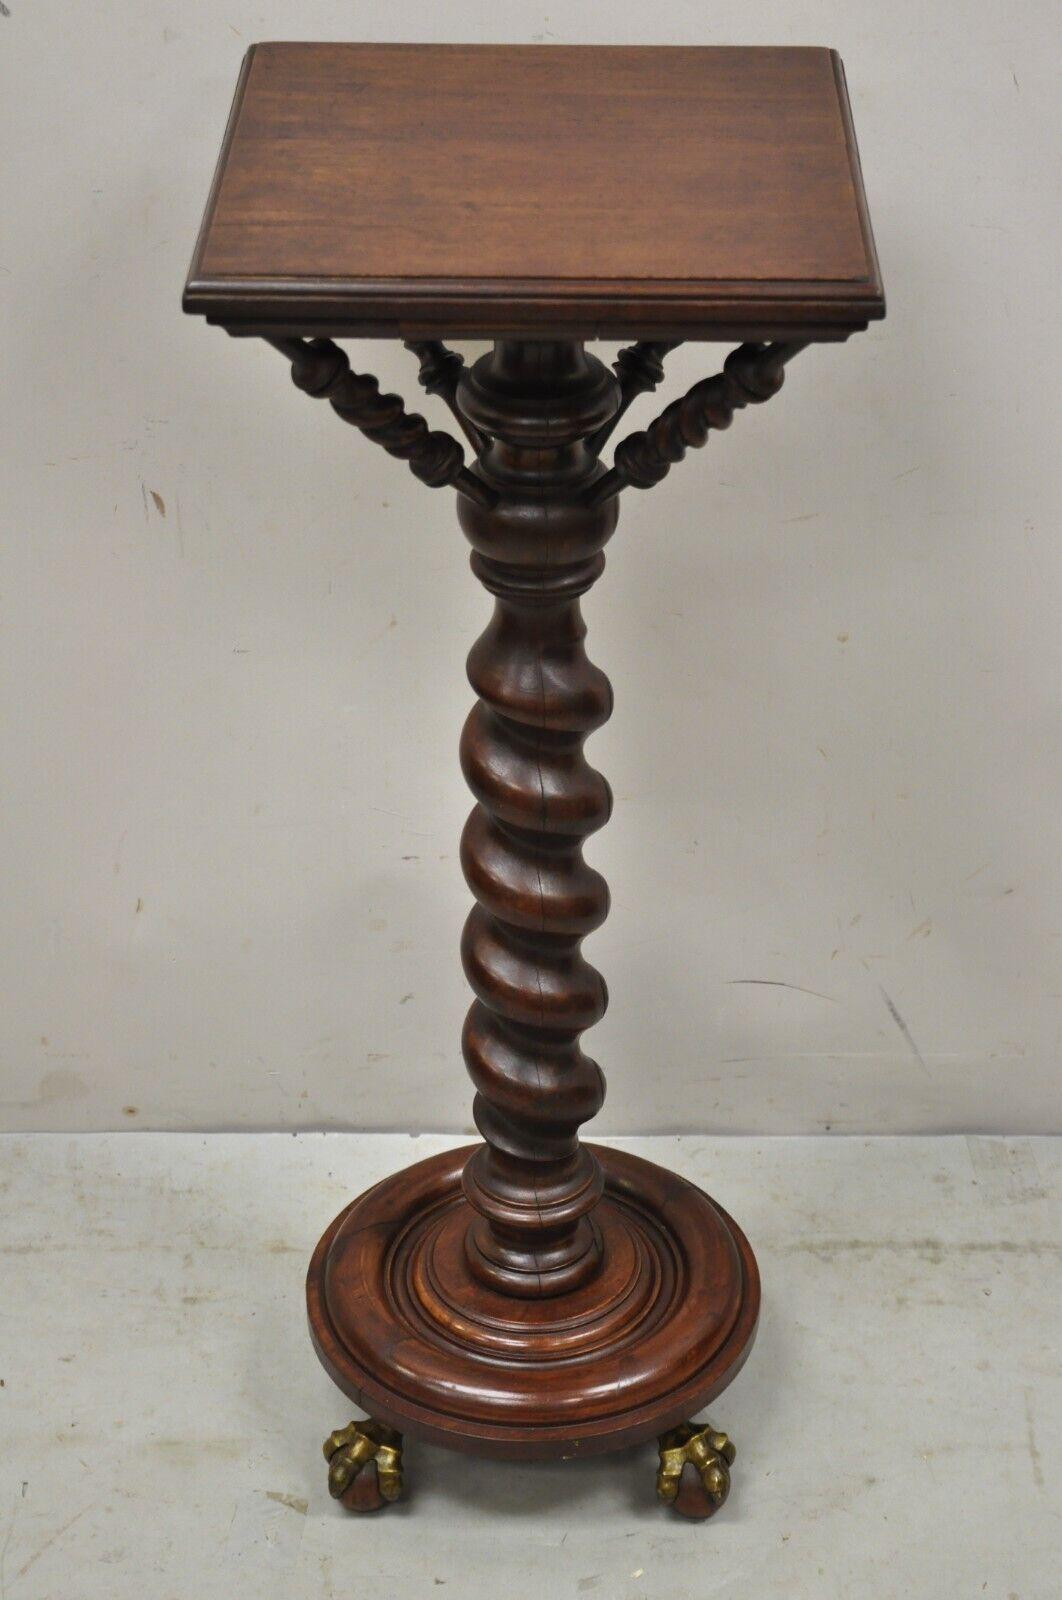 Antique Empire Victorian walnut barley twist spiral carved pedestal stand. Item features brass claw feet with wooden spheres, spiral barley twist shaft, square top, turn carved supports, beautiful wood grain, very nice antique item, great style and